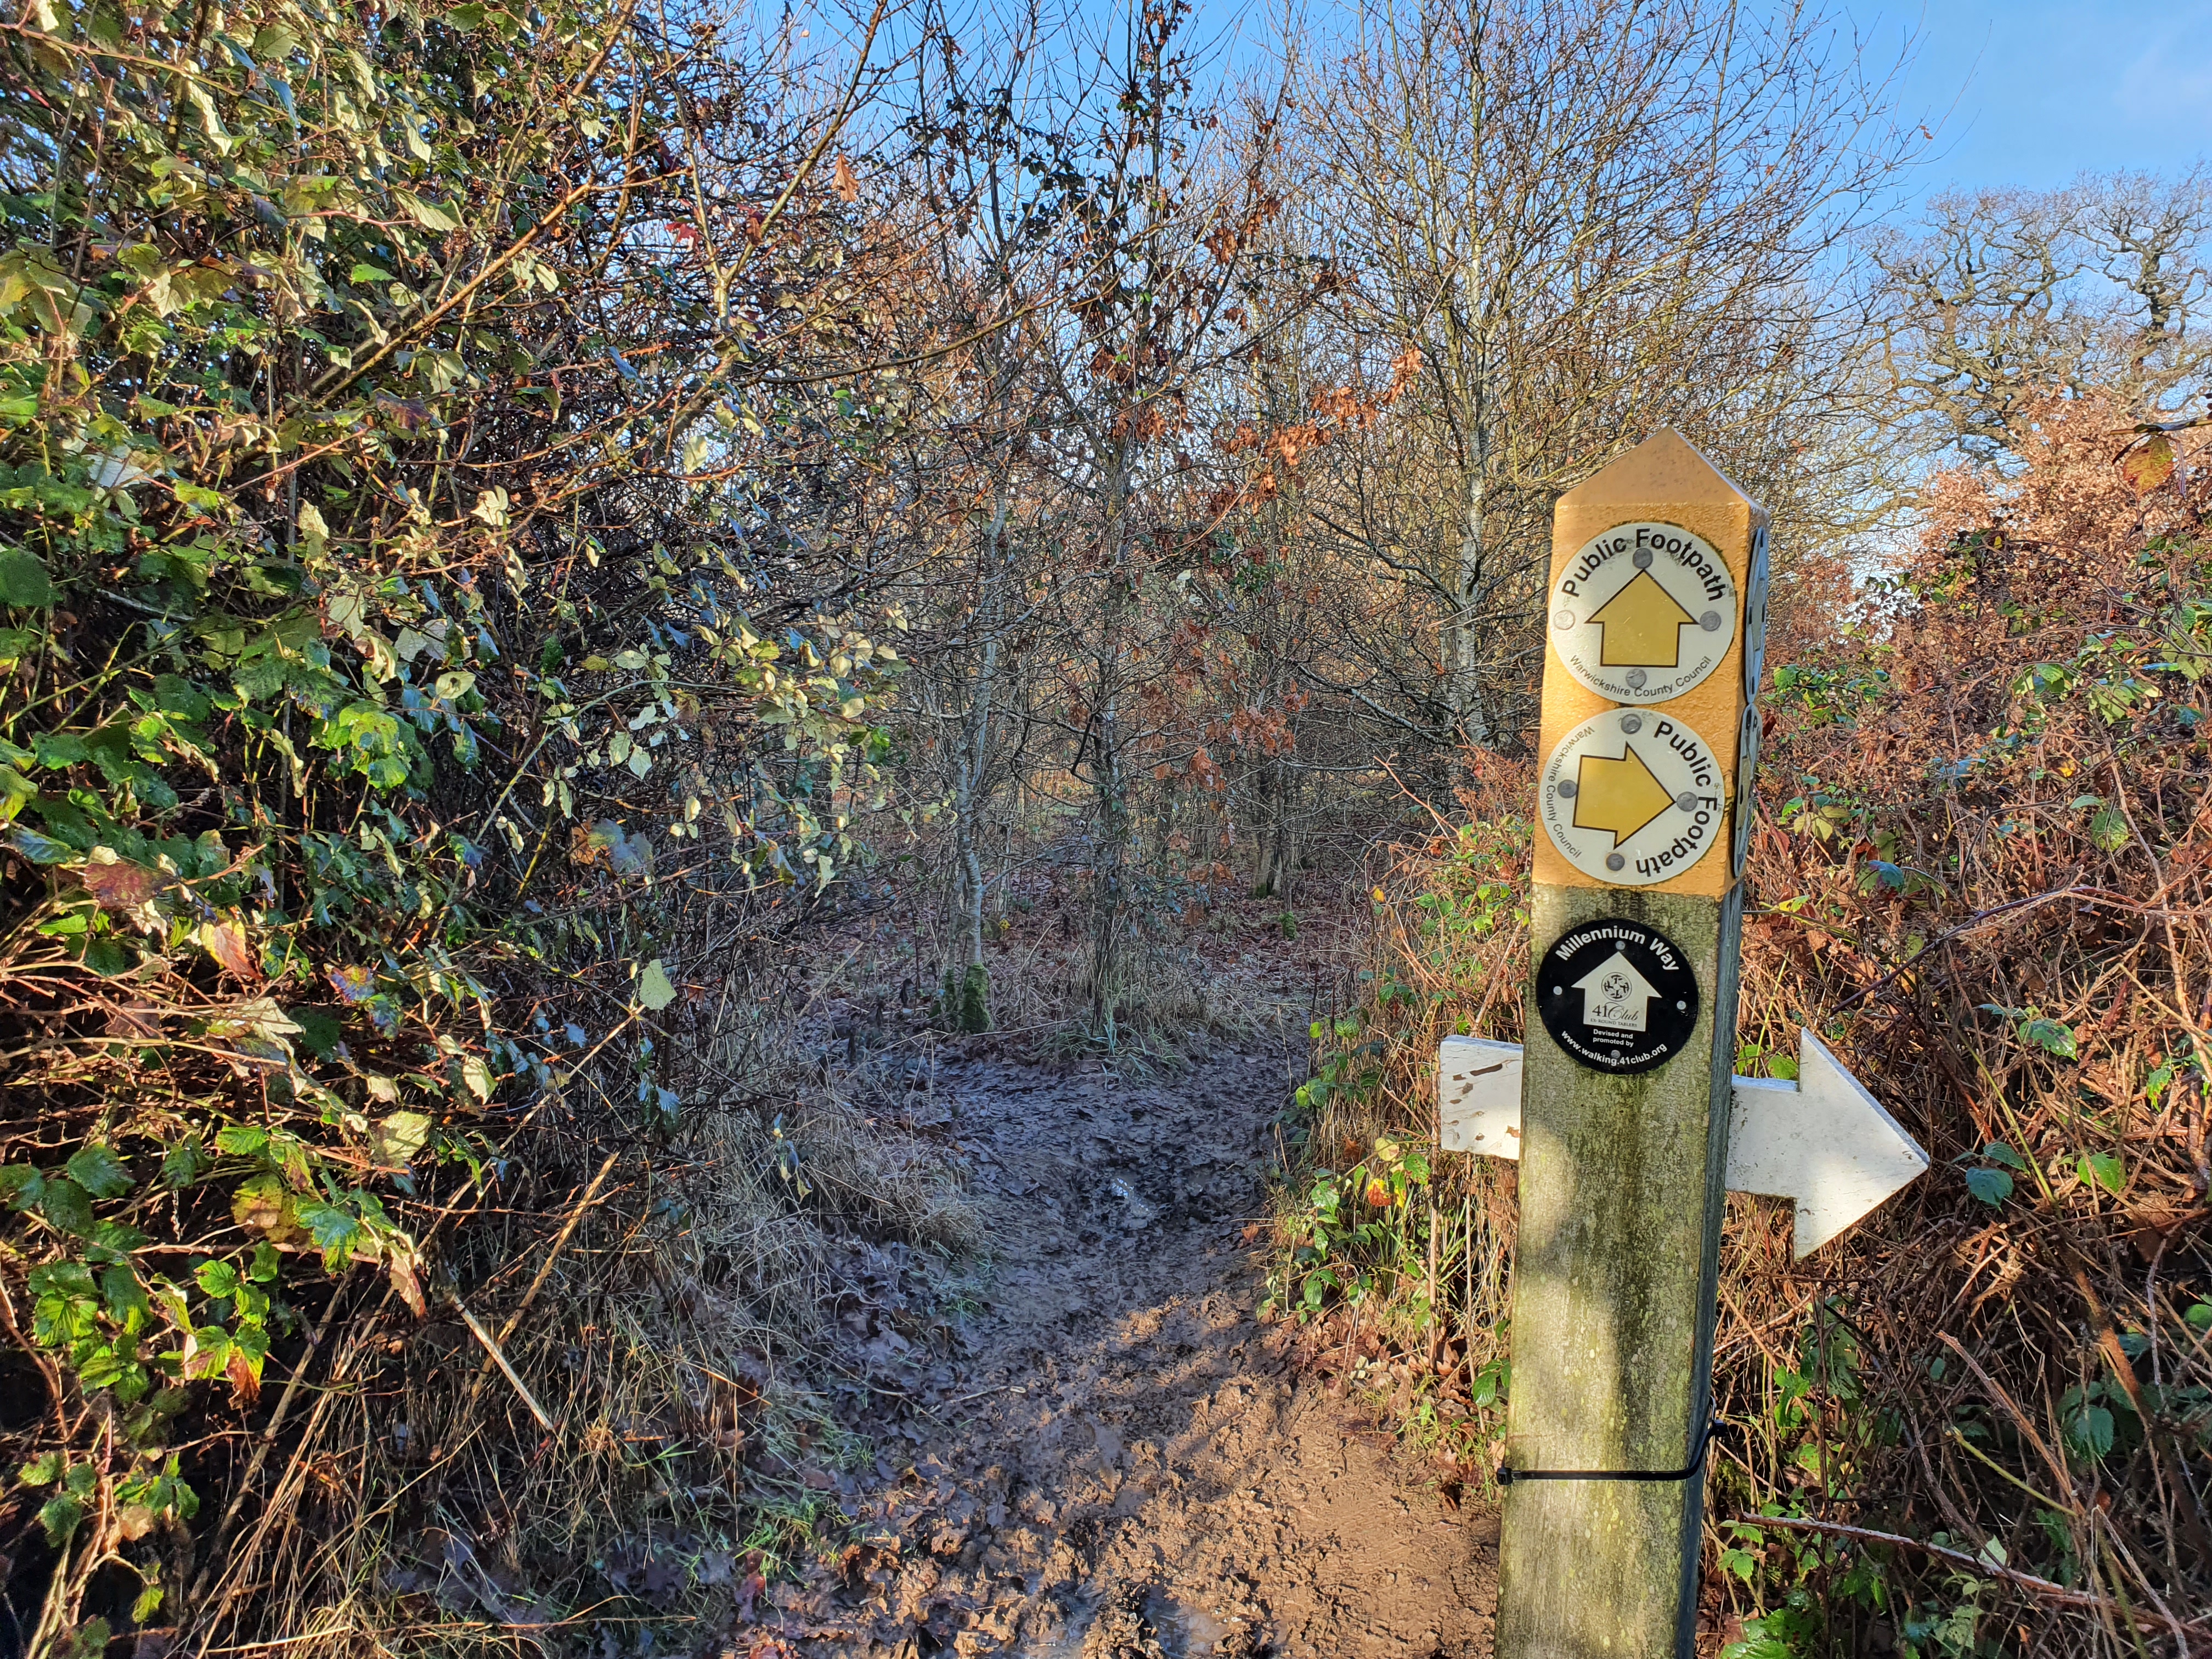 Waymark sign at point where paths diverge in lightly wooded section